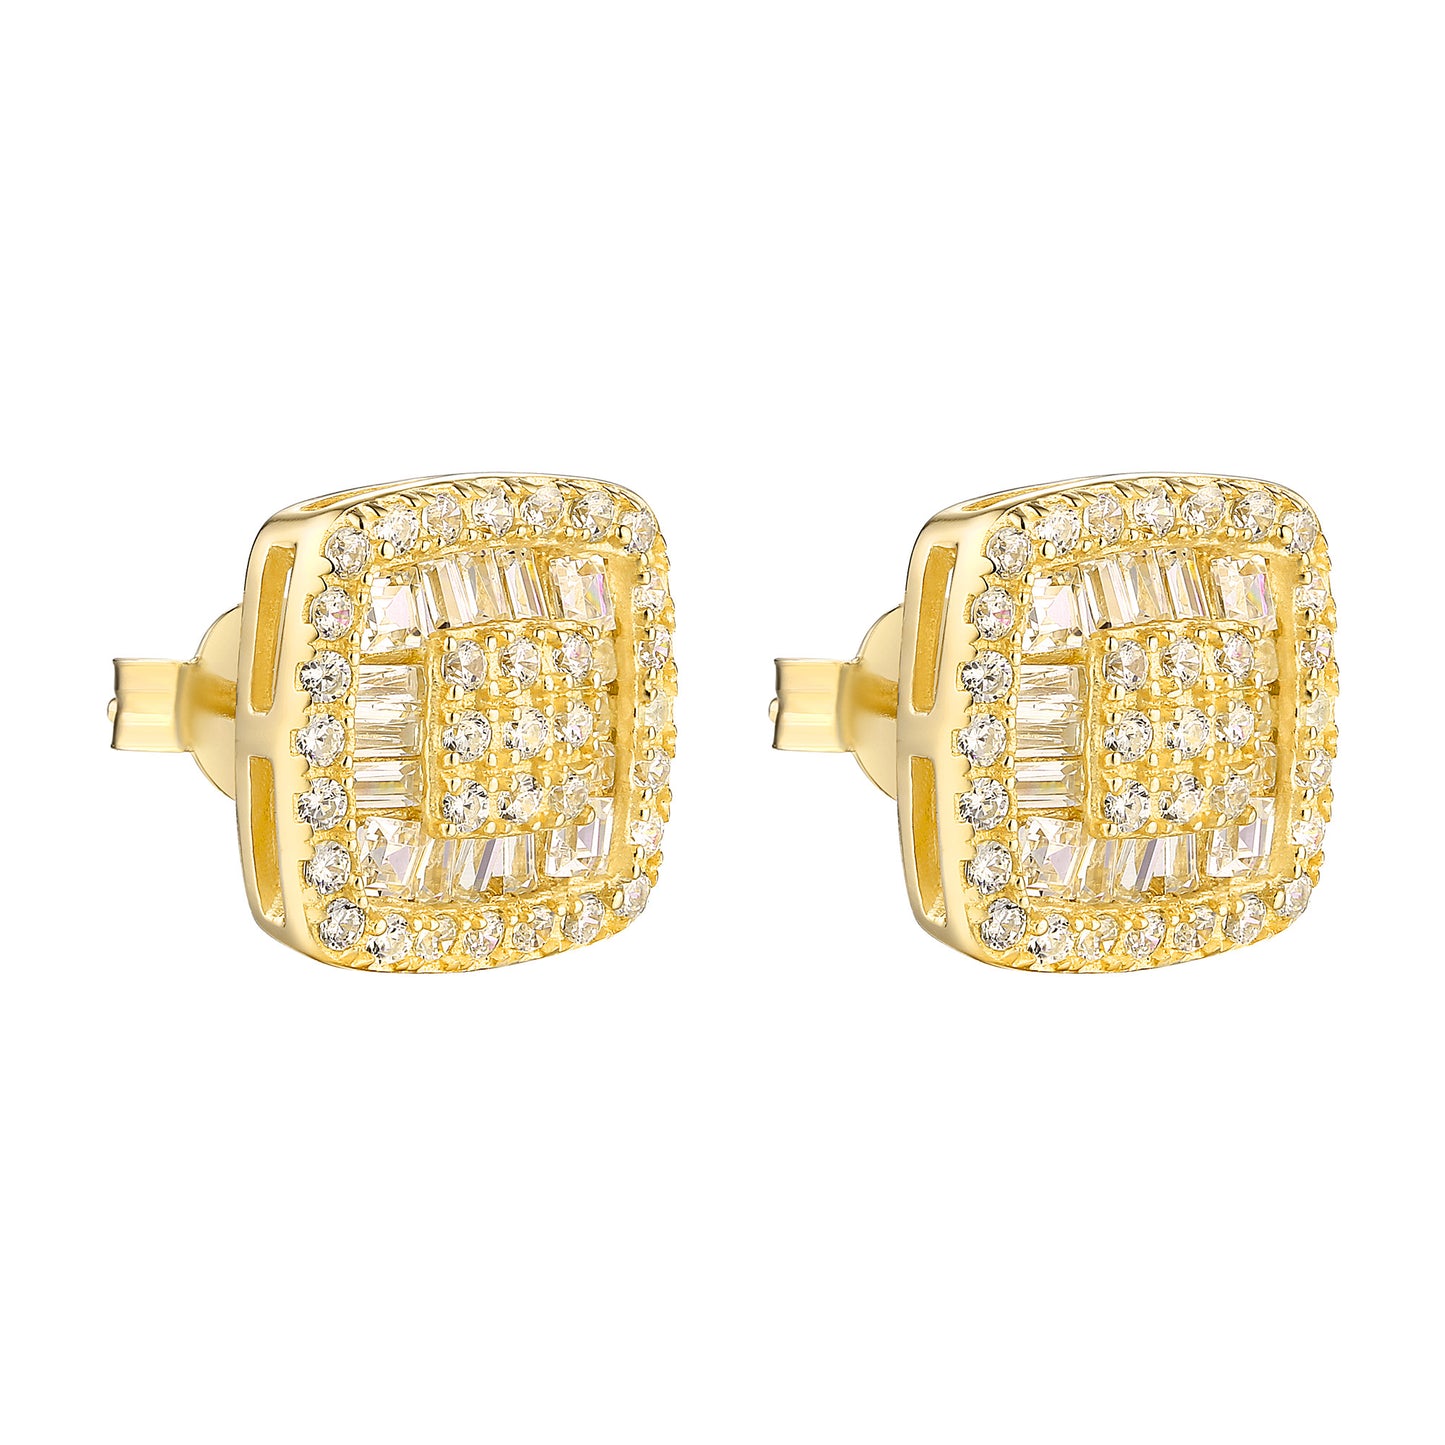 Earrings Simulated Diamonds Yellow Sterling Silver Push Back